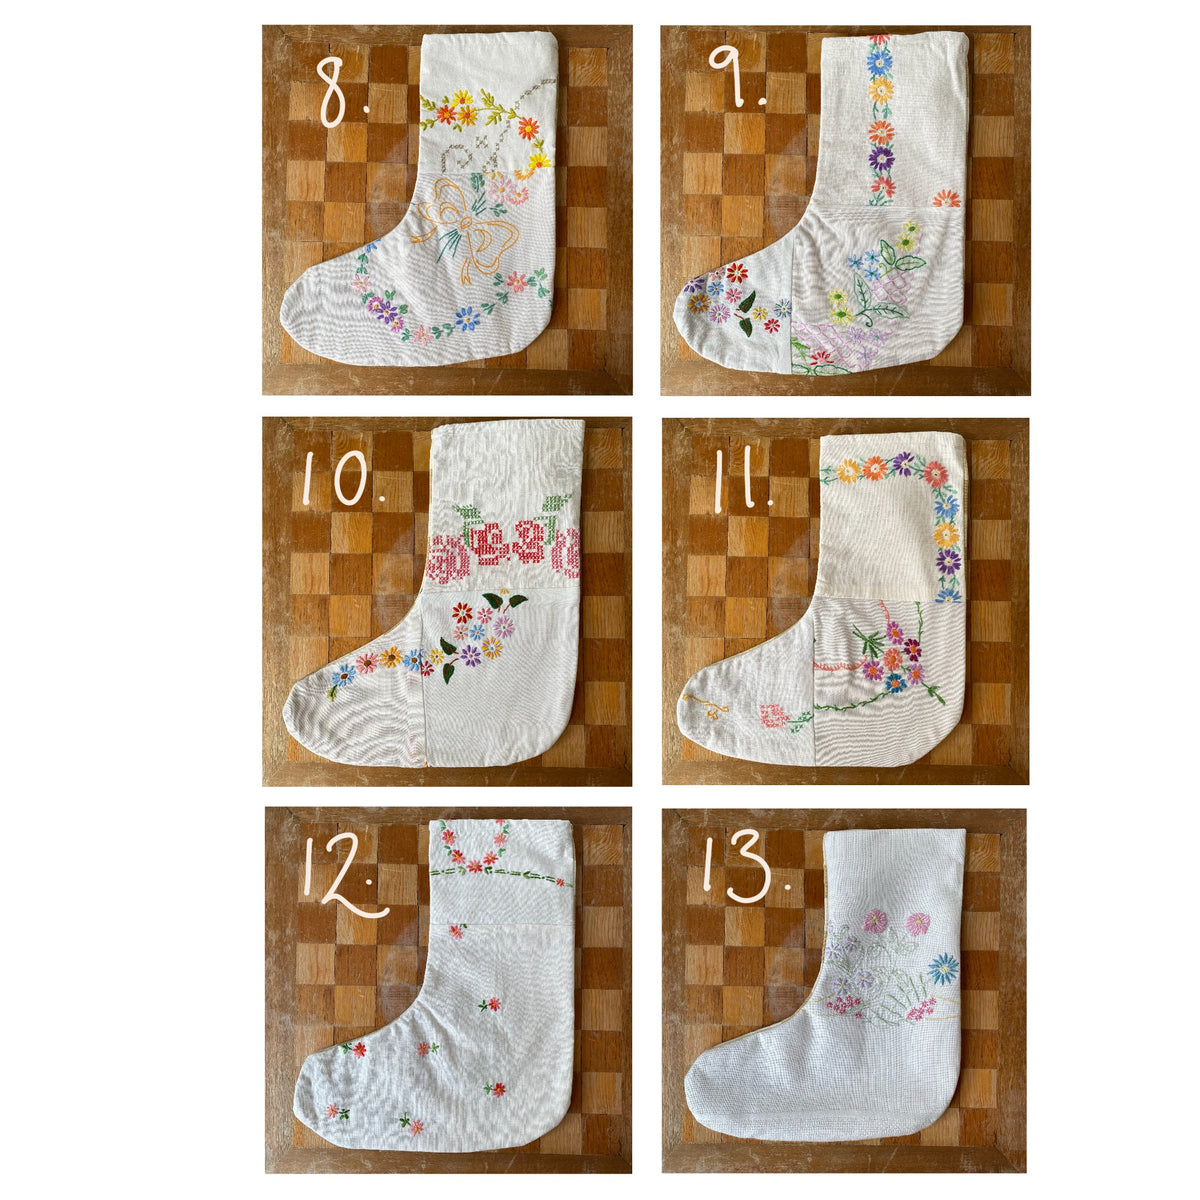 Special Edition One Off Christmas Stocking made from Vintage Embroidery